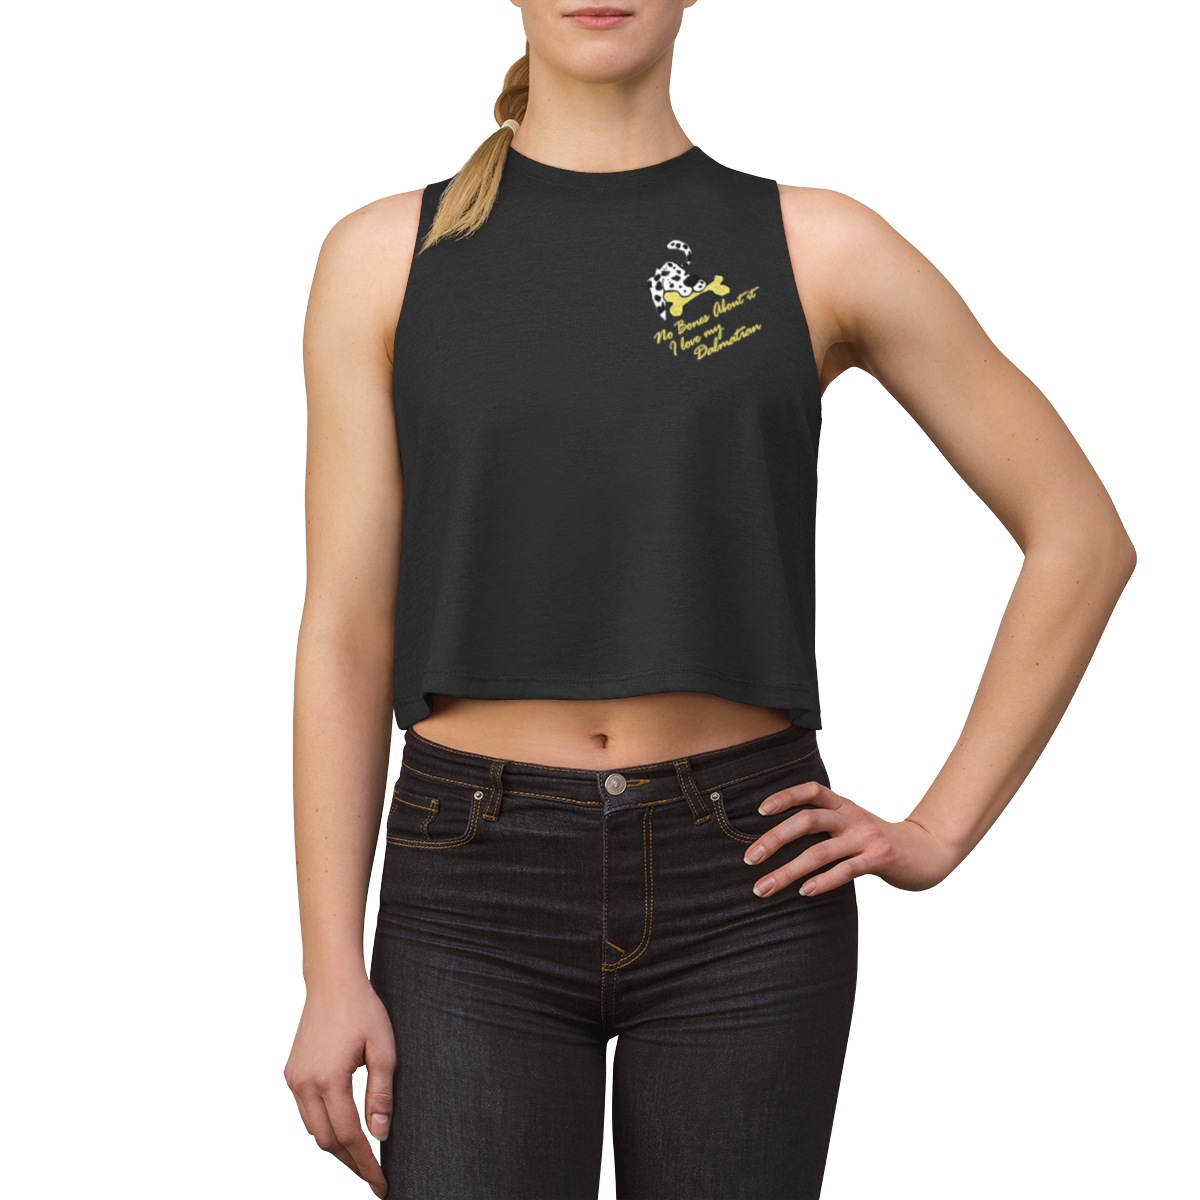 Womens Crop top (Gold Text) pic picture